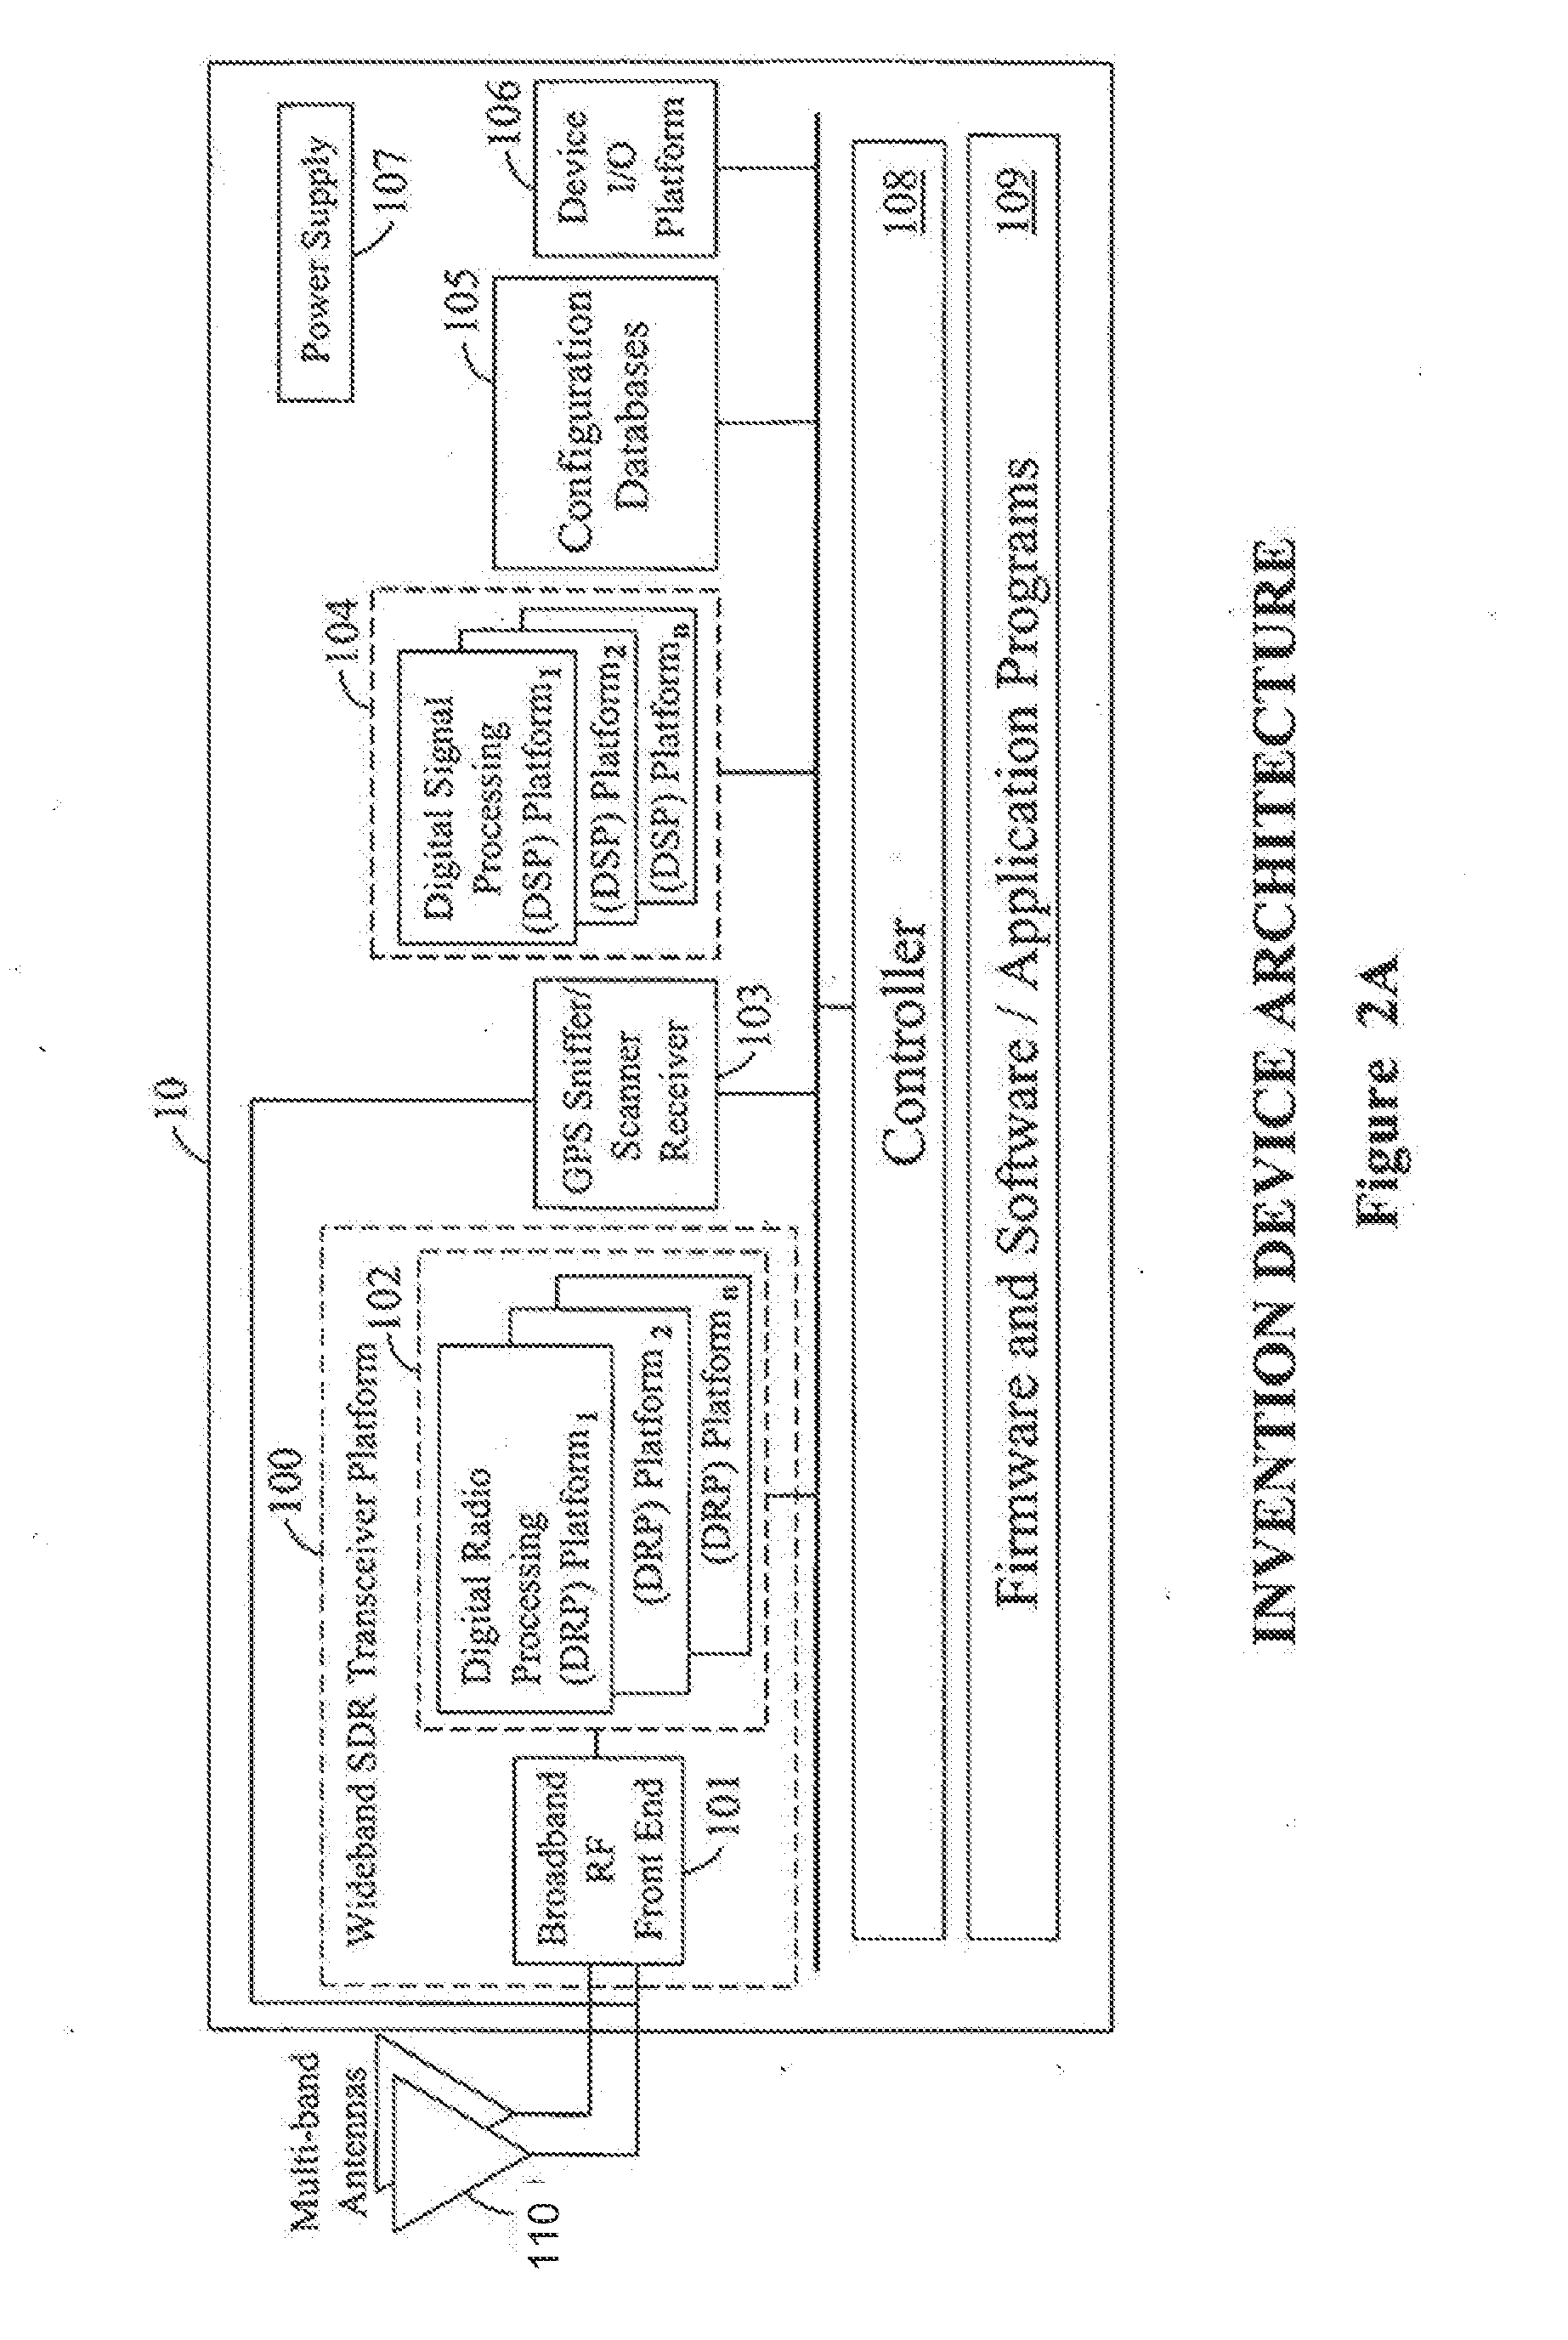 Advanced multi-network client device that utilizes multiple digital radio processors for implementing frequency channel aggregation within different spectrum bands